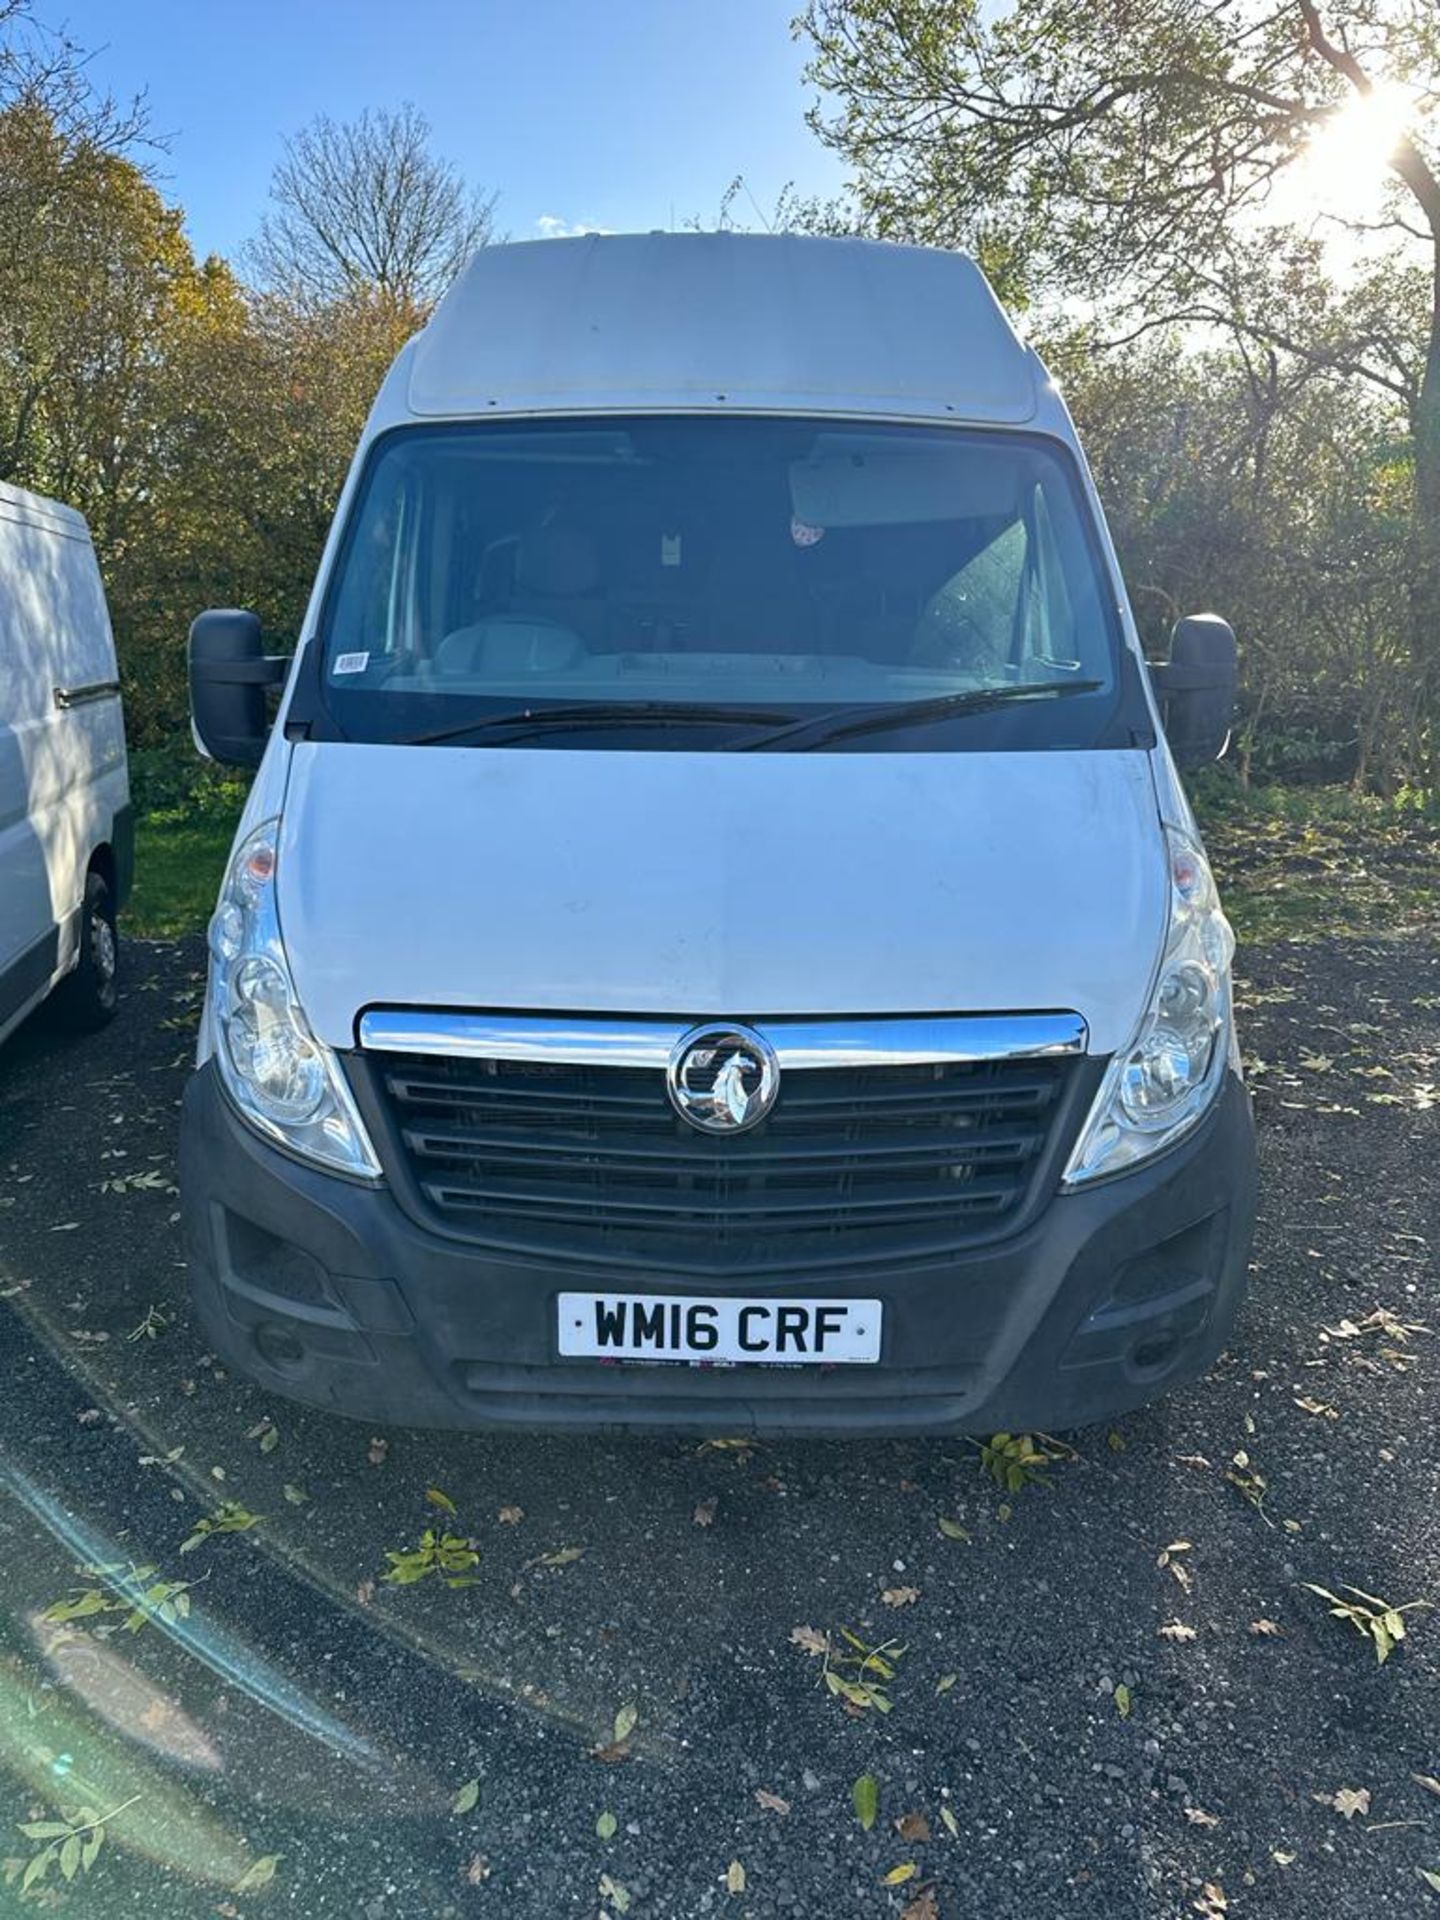 2016 16 VAUXHALL MOVANO PANEL VAN - L3 H3 MODEL - 118K MILES - PLY LINED - Image 8 of 10